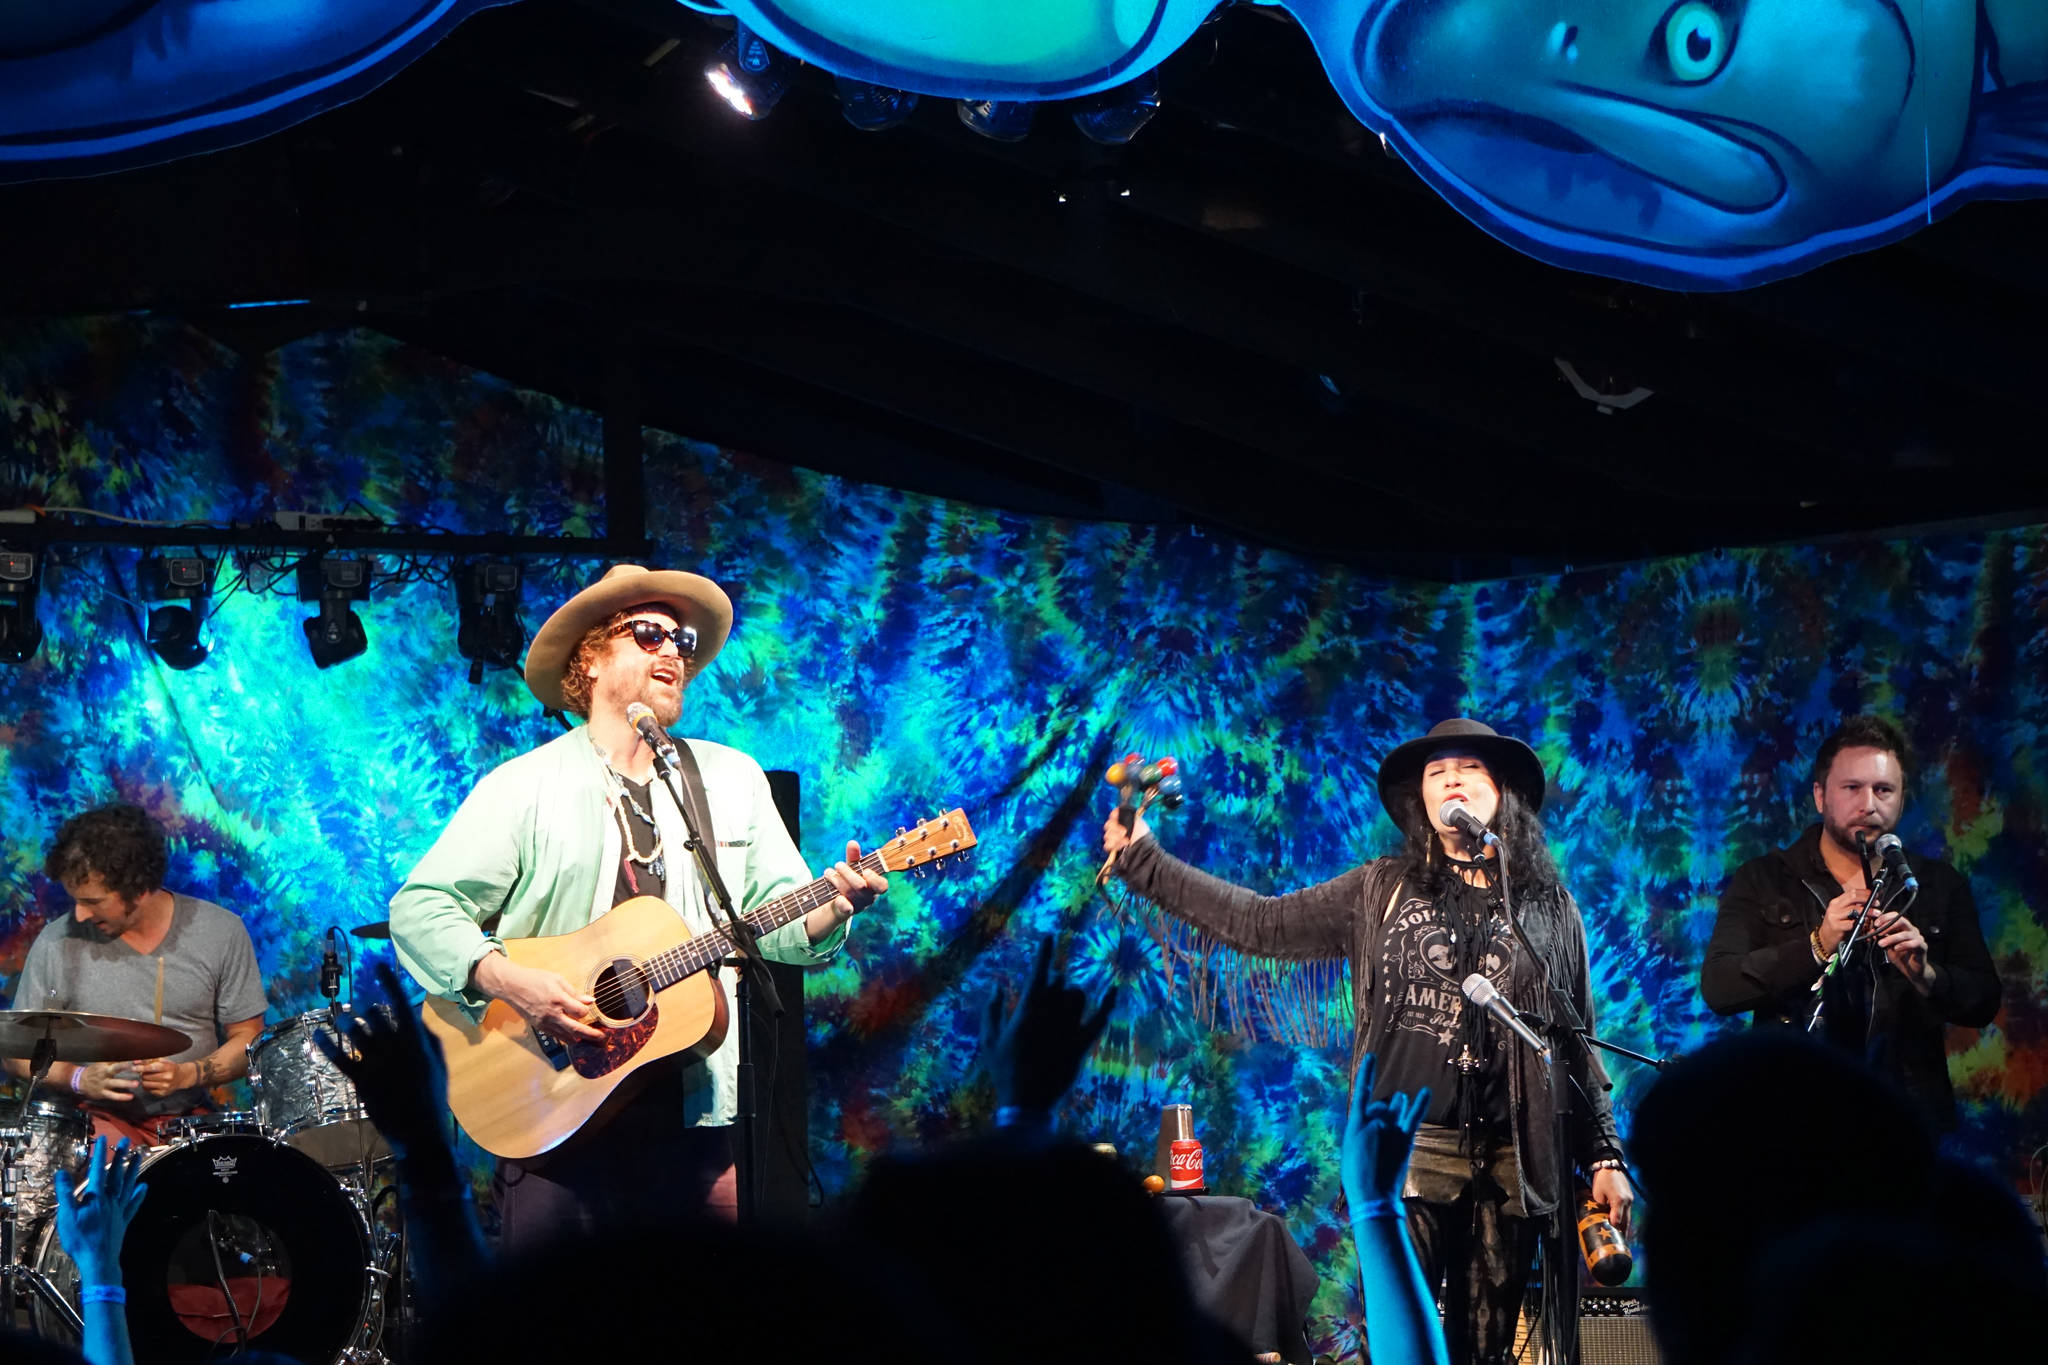 Zil Fessler, far left, Michael Glabicki, left, Liz Berlin, center, and Dirk Miller, right, of Rusted Root perform on Saturday night, Aug. 5, 2017, at Salmonfest, Ninilchik, Alaska. (Photo by Michael Armstrong, Homer News)